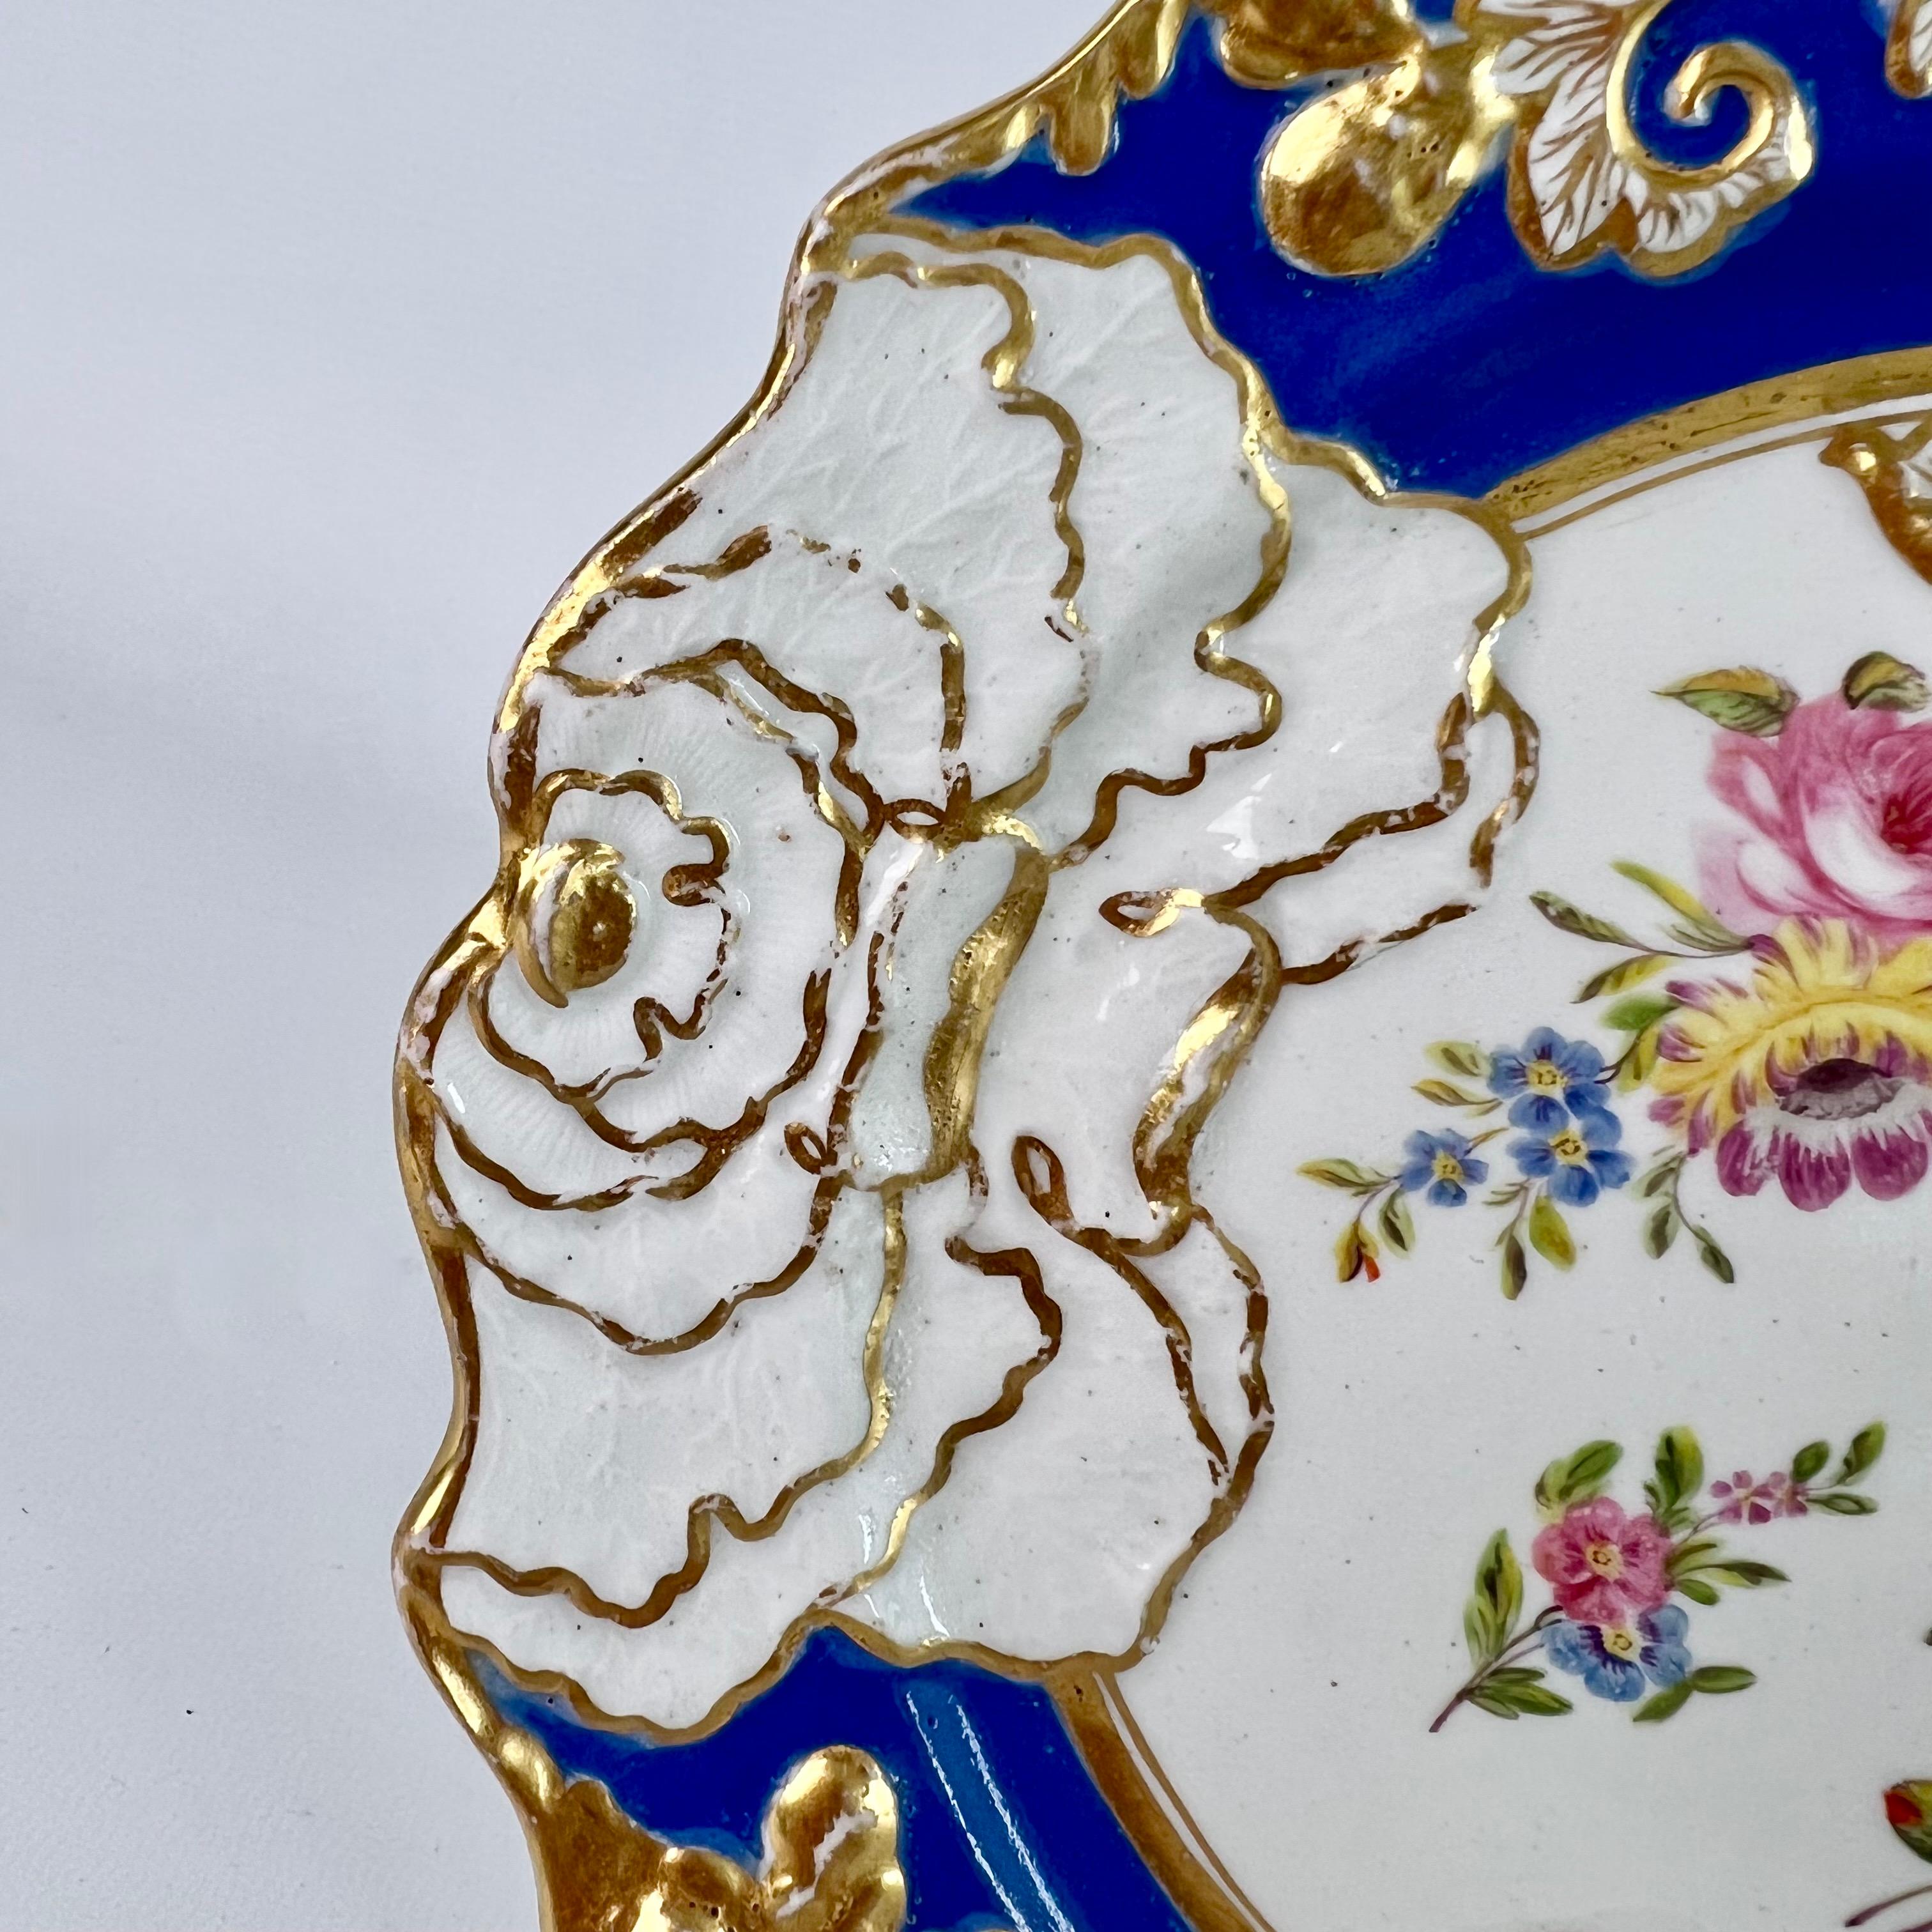 Rococo Revival Mason's Ironstone Plate, Cabbage Moulded Blue with Flowers, ca 1840